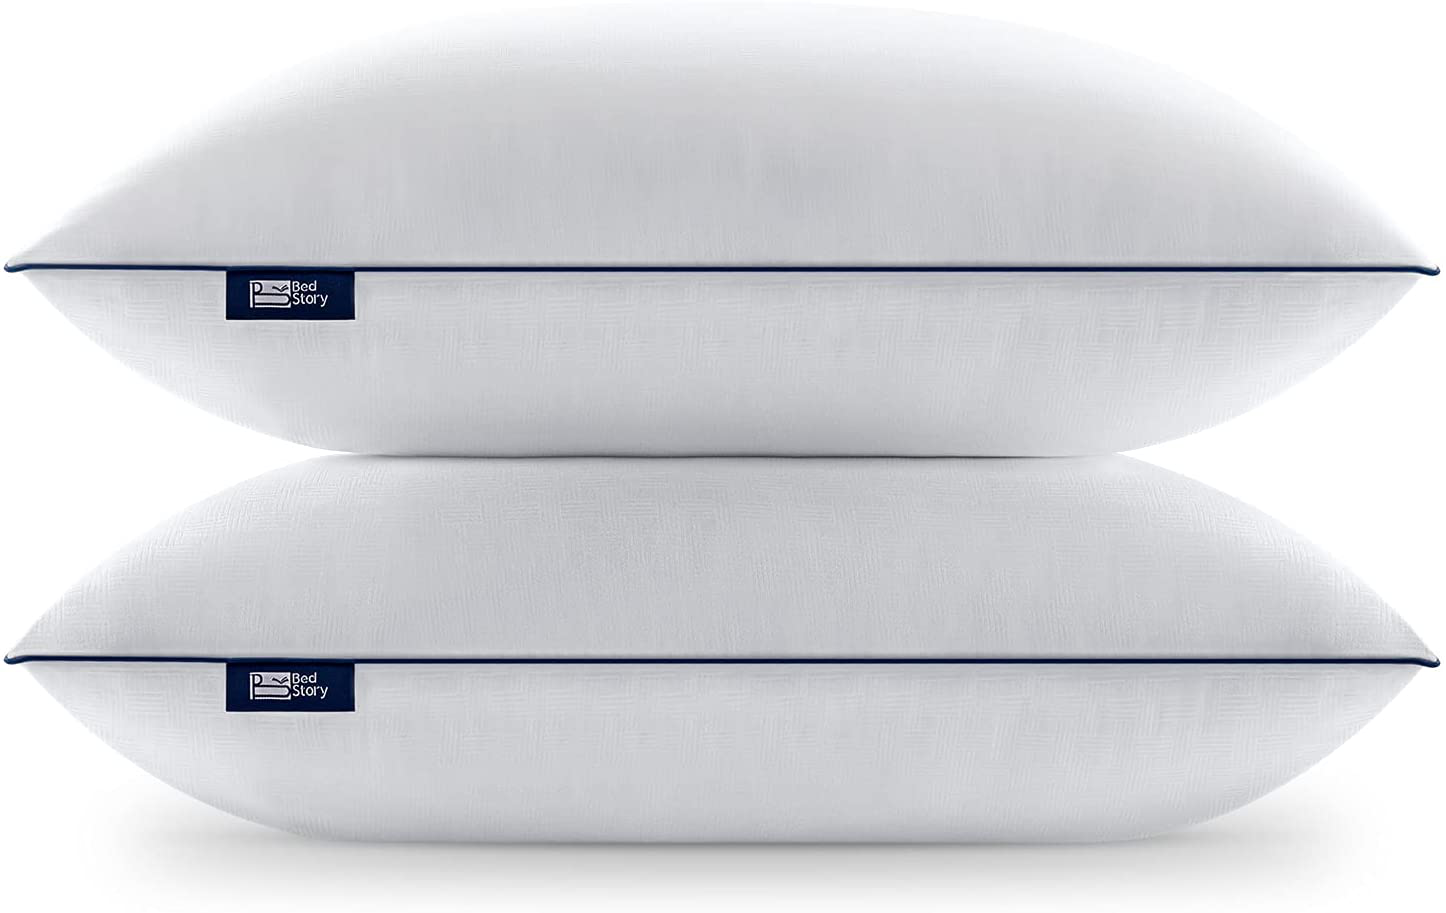 Hotel Quality Luxury Pillows Set of 2, Bed Pillows For Sleeping (Set of 2) 